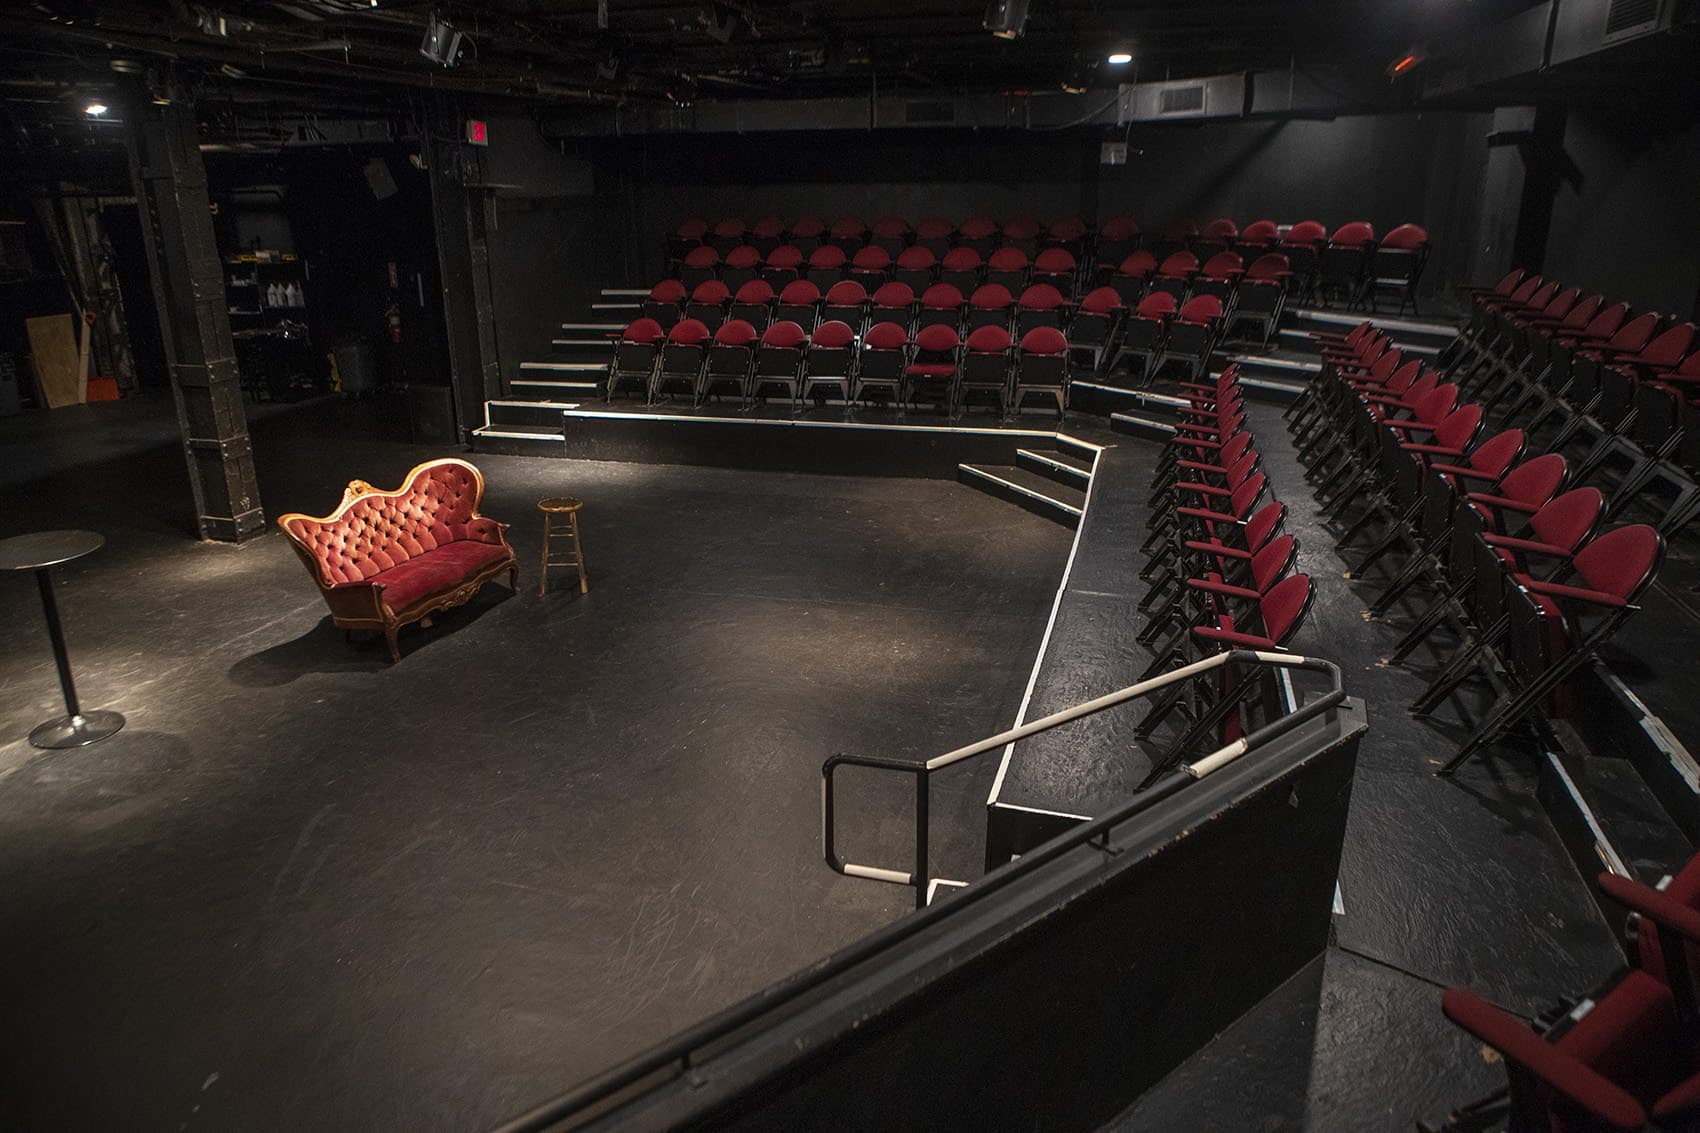 A theater at the Boston Center for the Arts. (Jesse Costa/WBUR)